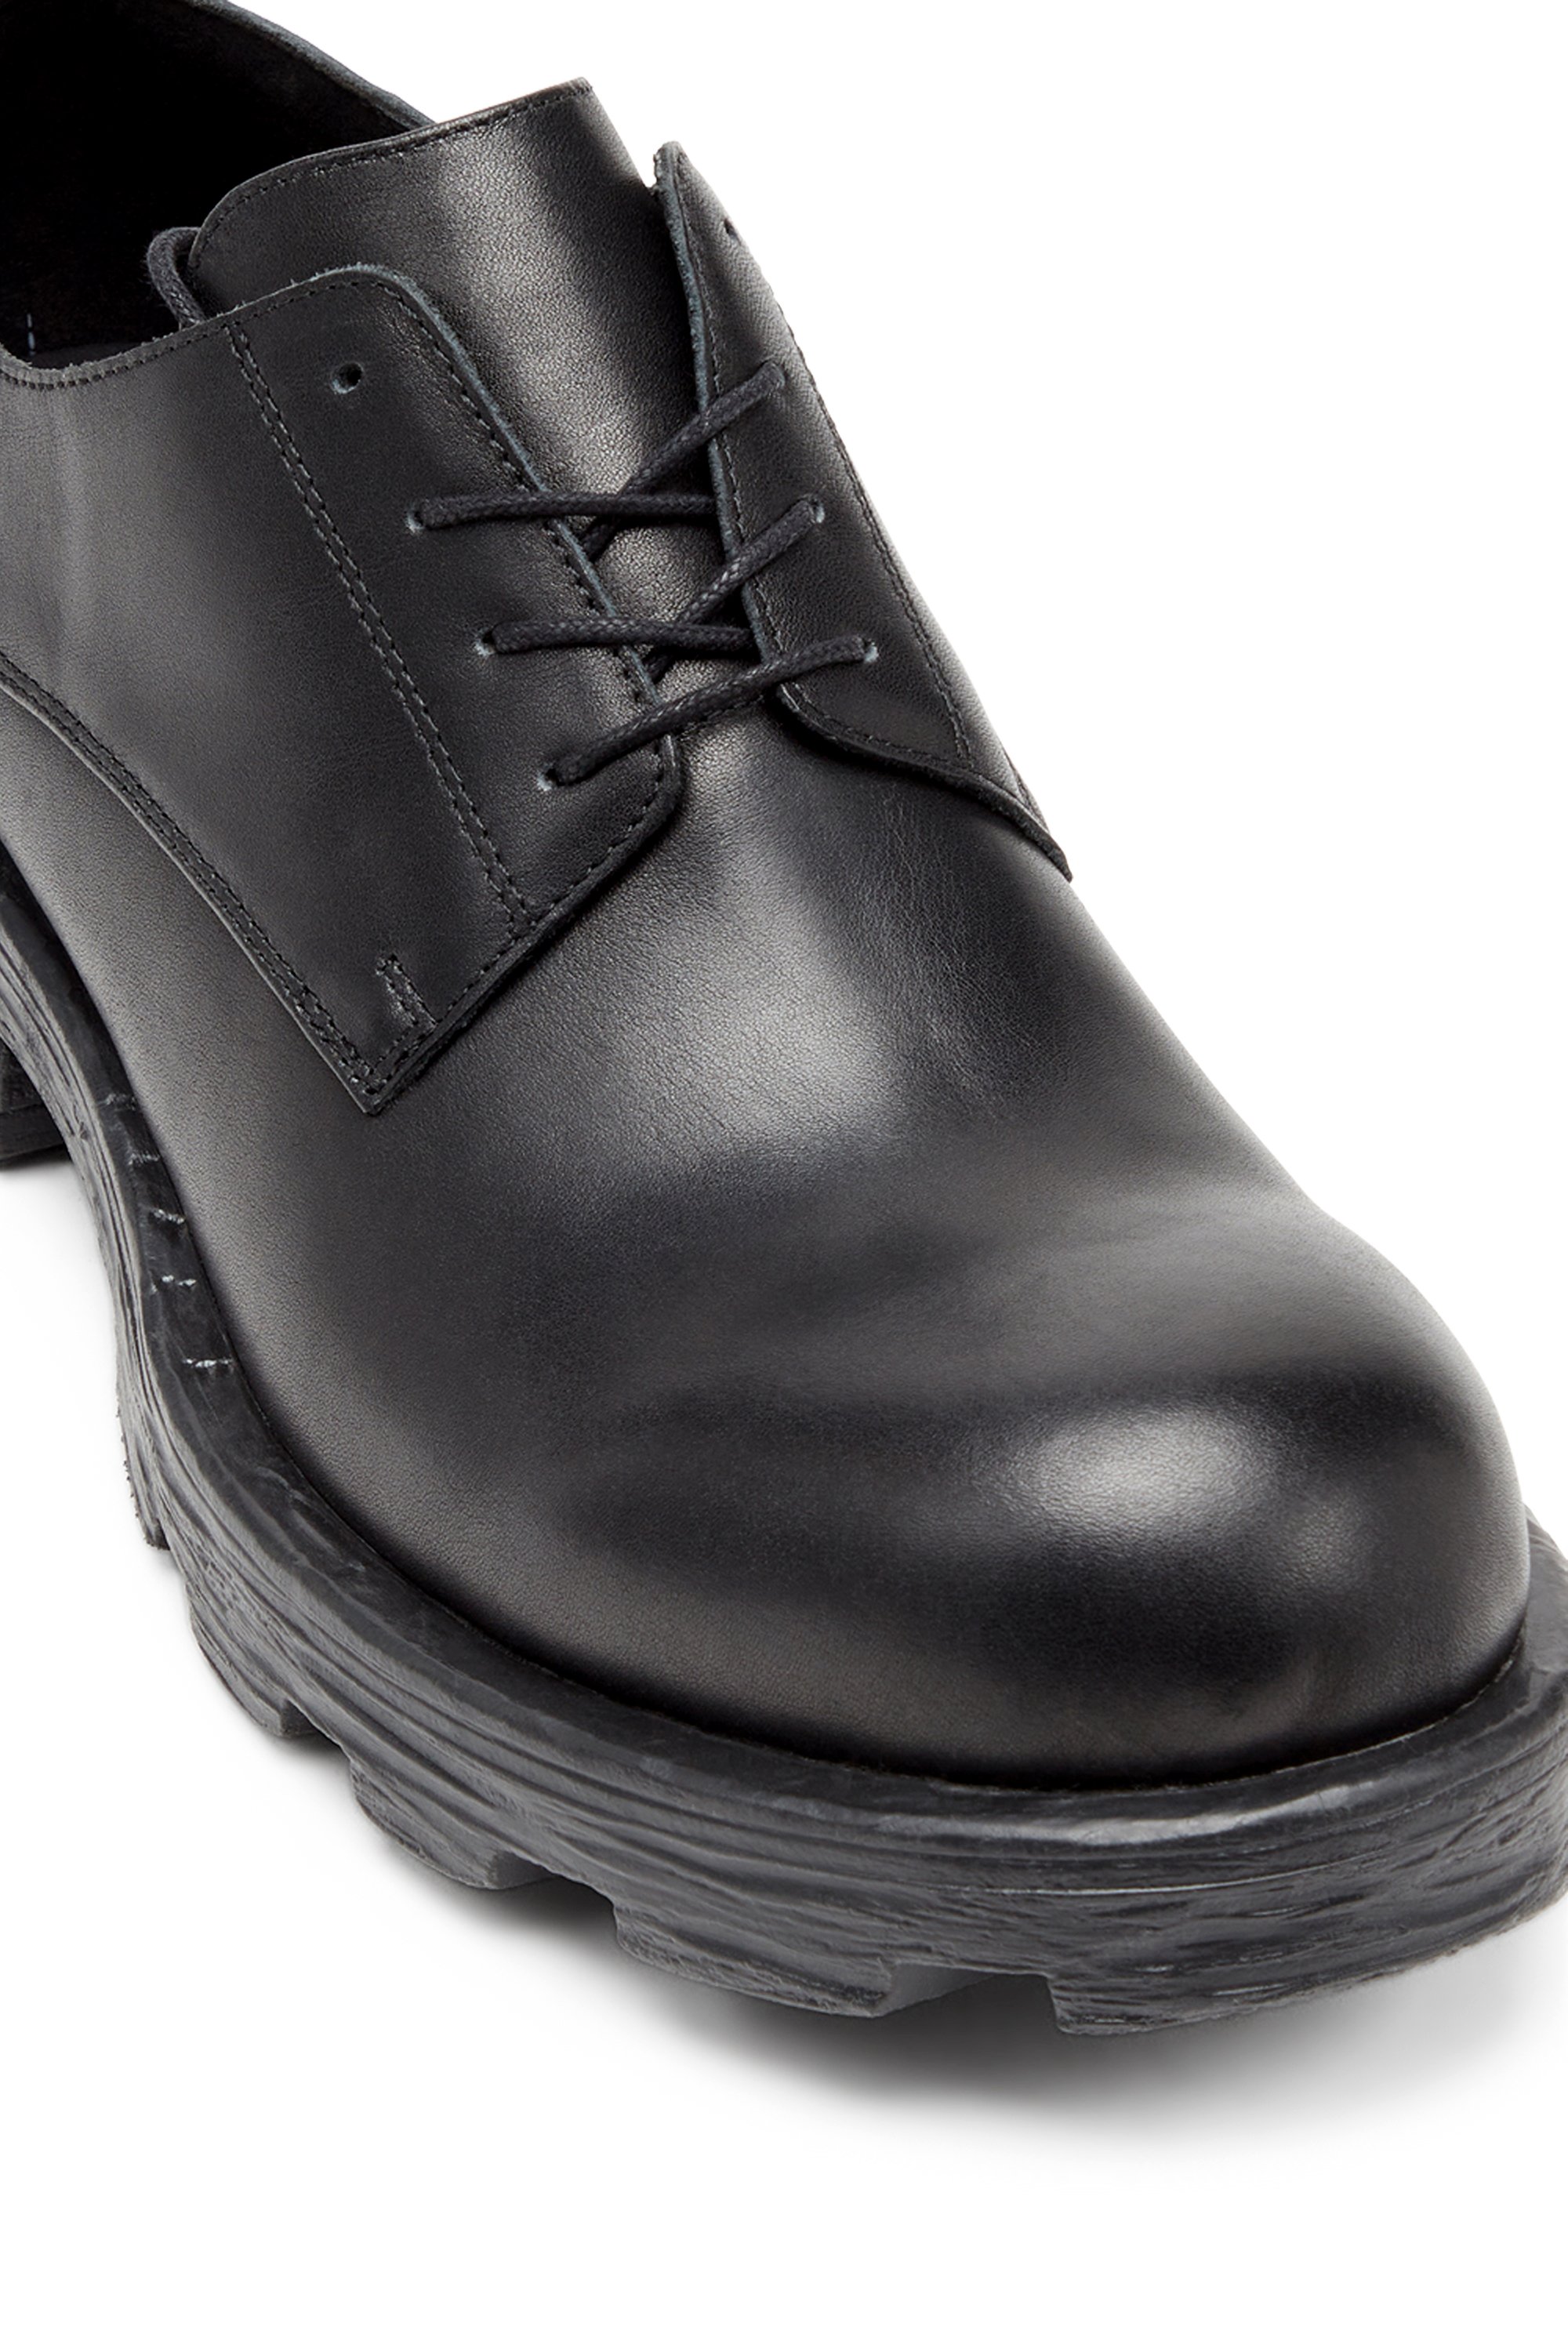 Diesel - D-HAMMER SH, Man D-Hammer-Derby shoes in textured leather in Black - Image 6